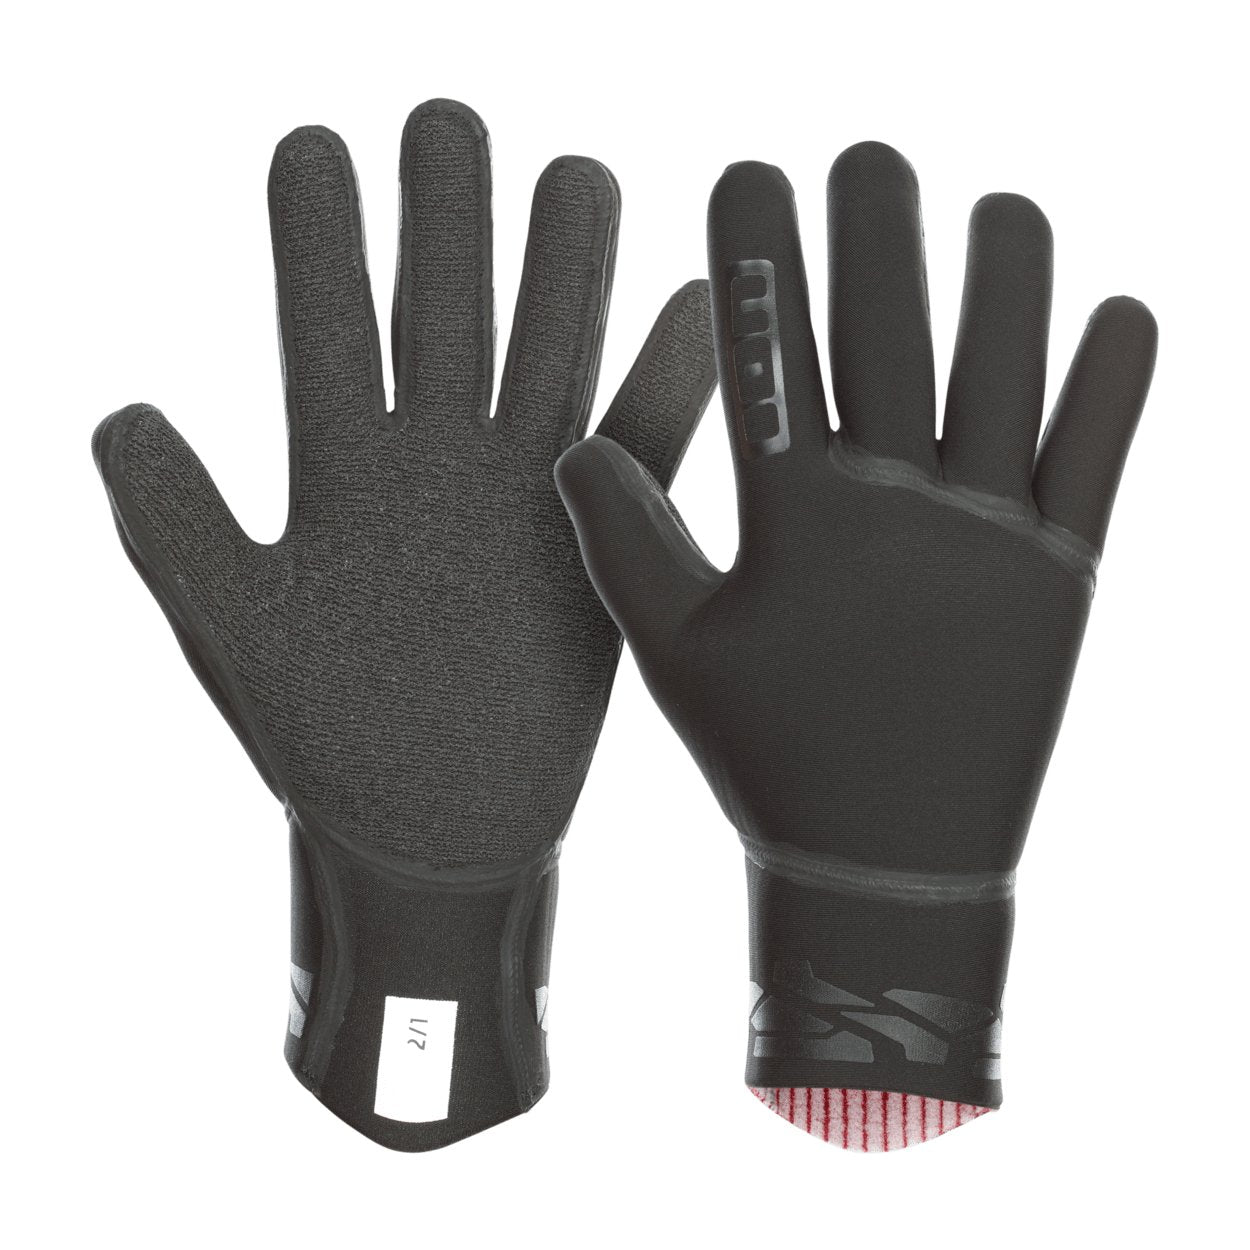 ION Neo Gloves 2/1 2022 - Worthing Watersports - 9008415883011 - Neo Accessories - ION Water